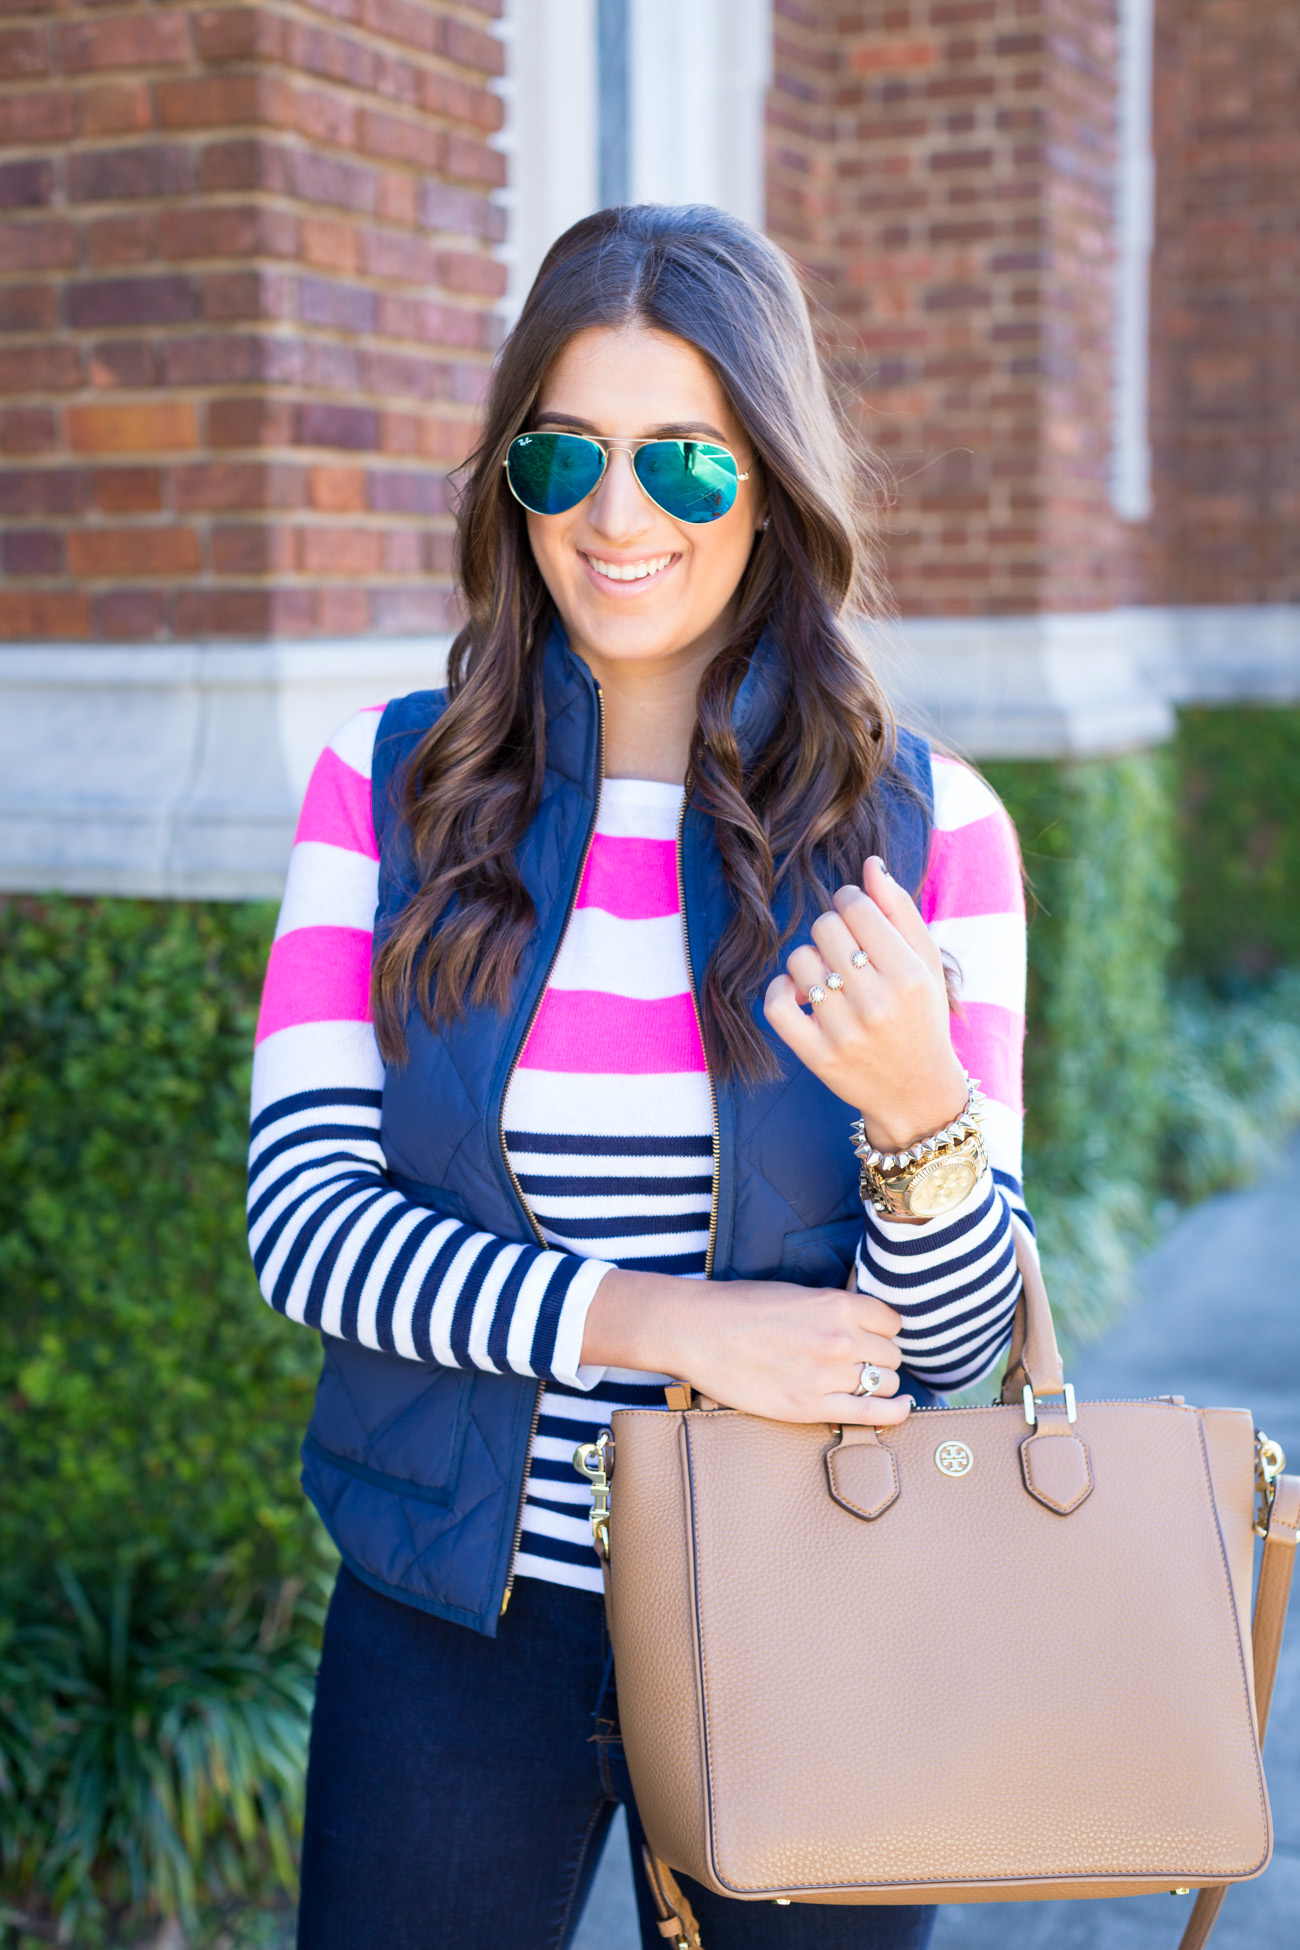 lilly pulitzer, stripe sweater, quilted vest, puffer vest, cognac booties, fall fashion // grace wainwright from a southern drawl